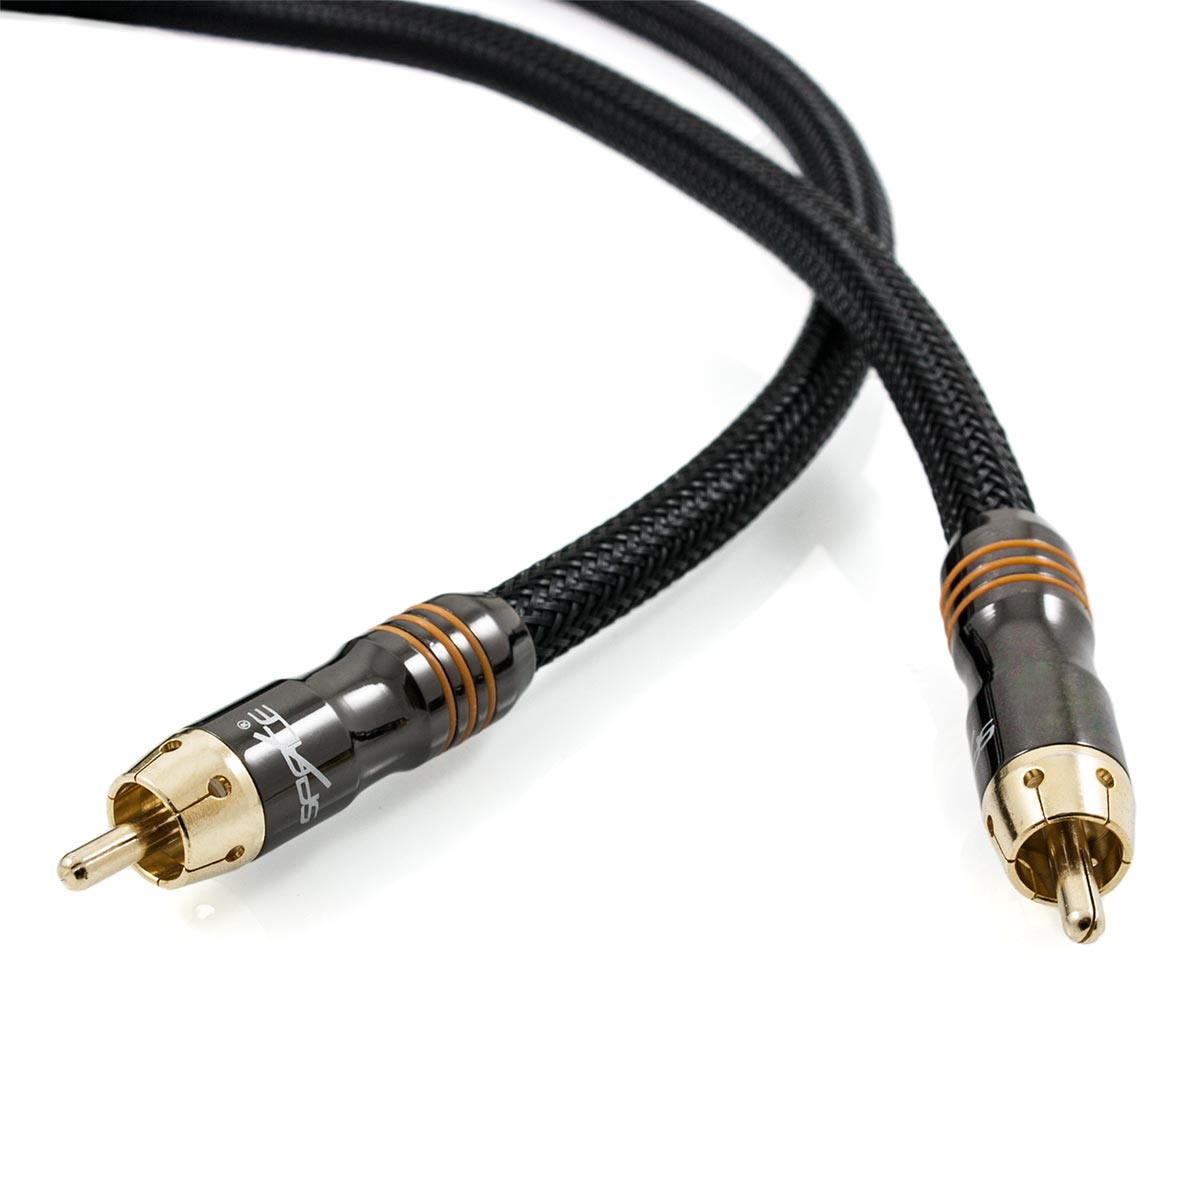 How to put end on coaxial cable